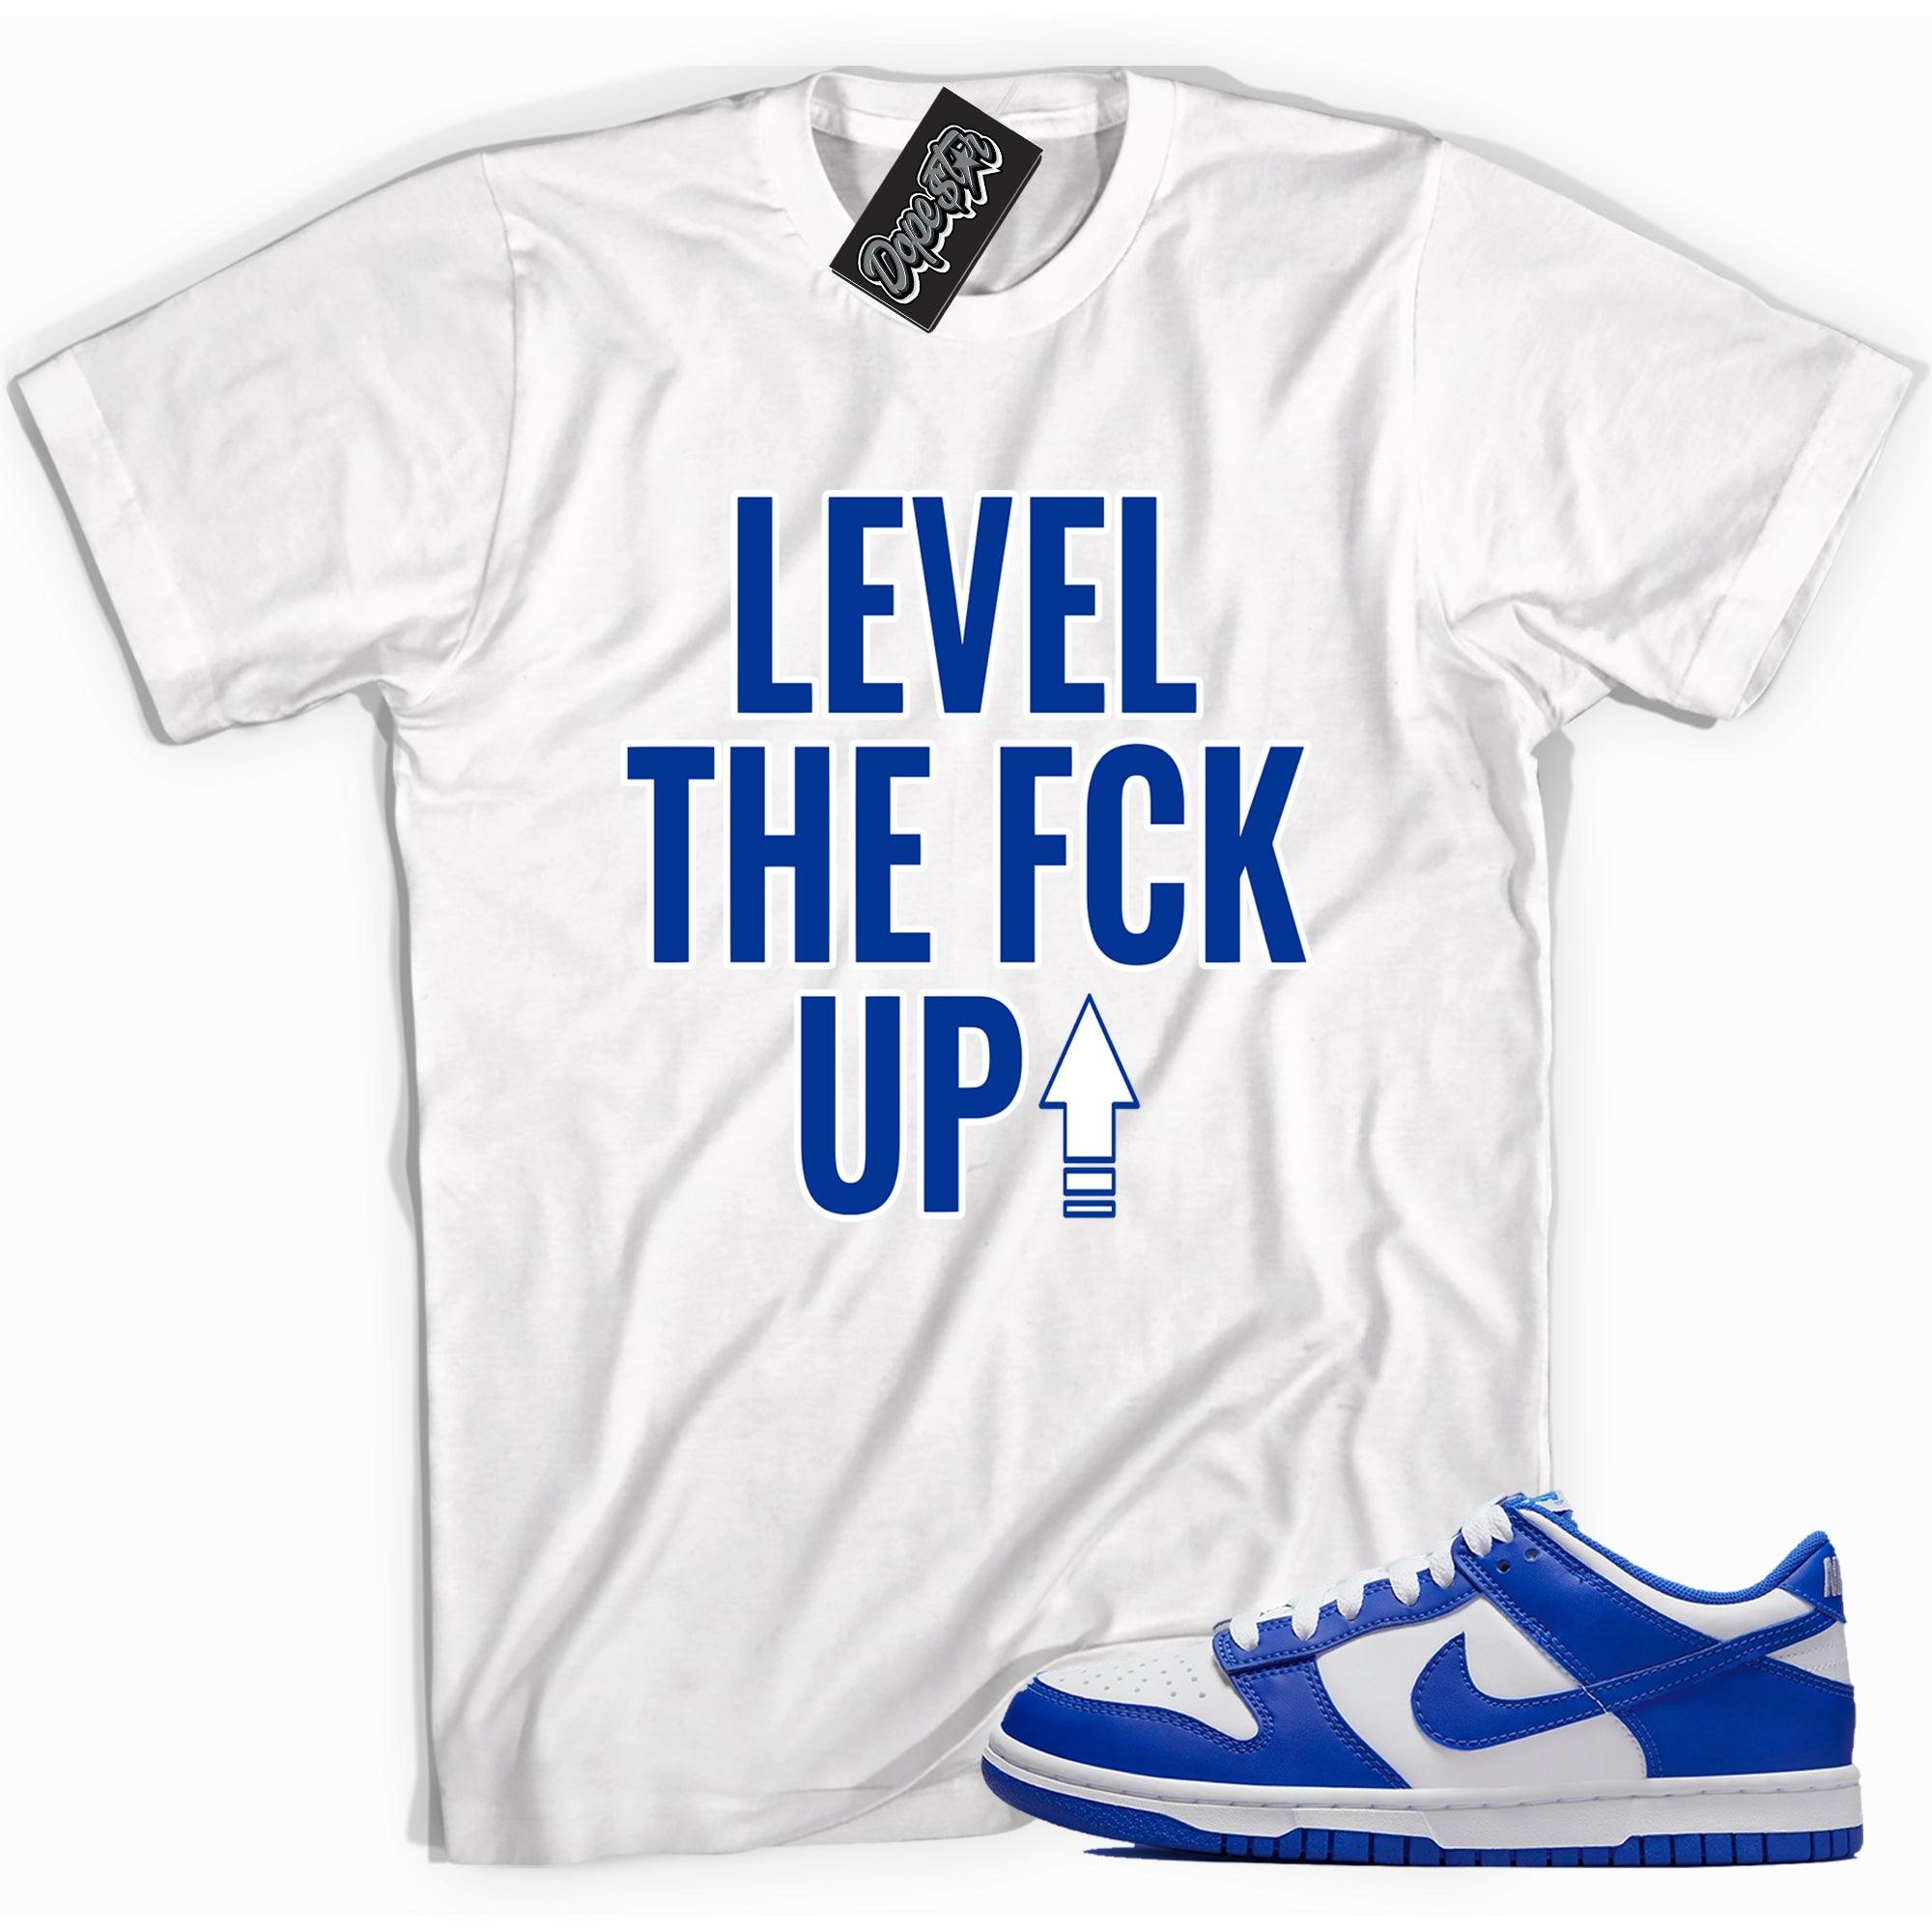 Cool white graphic tee with 'Level Up' print, that perfectly matches Nike Dunk Low Racer Blue sneakers.